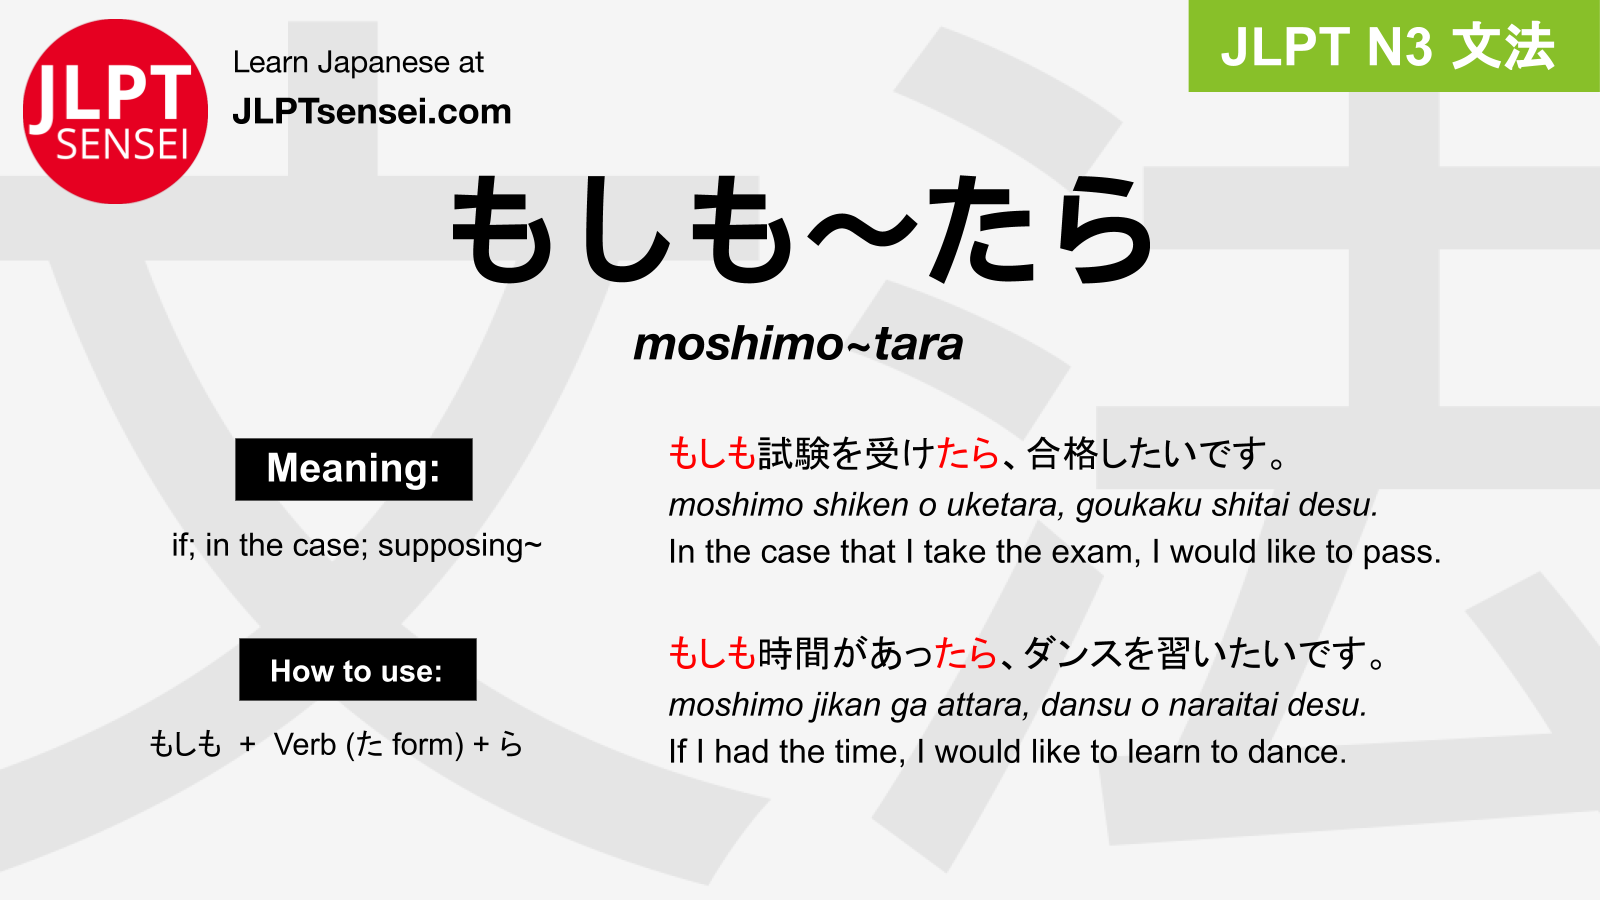 Moshimo meaning